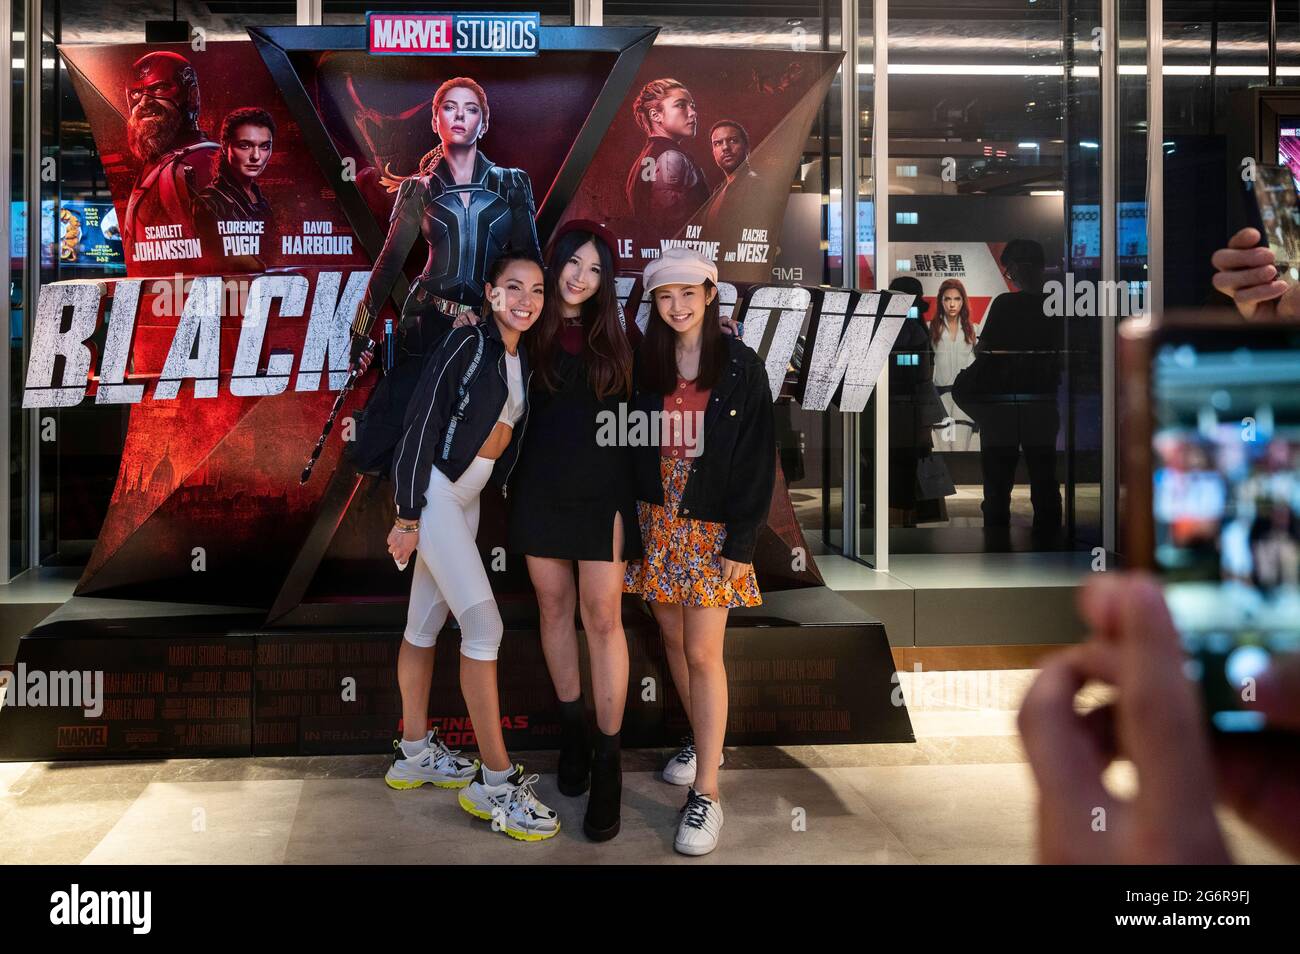 Hong Kong, China. 07th July, 2021. Spectators pose in front of Disney's and Marvel Studios movie banner for the screening of Black Widow film, played by Scarlett Johansson, at a movie theater in Hong Kong. (Photo by Budrul Chukrut/SOPA Images/Sipa USA) Credit: Sipa USA/Alamy Live News Stock Photo